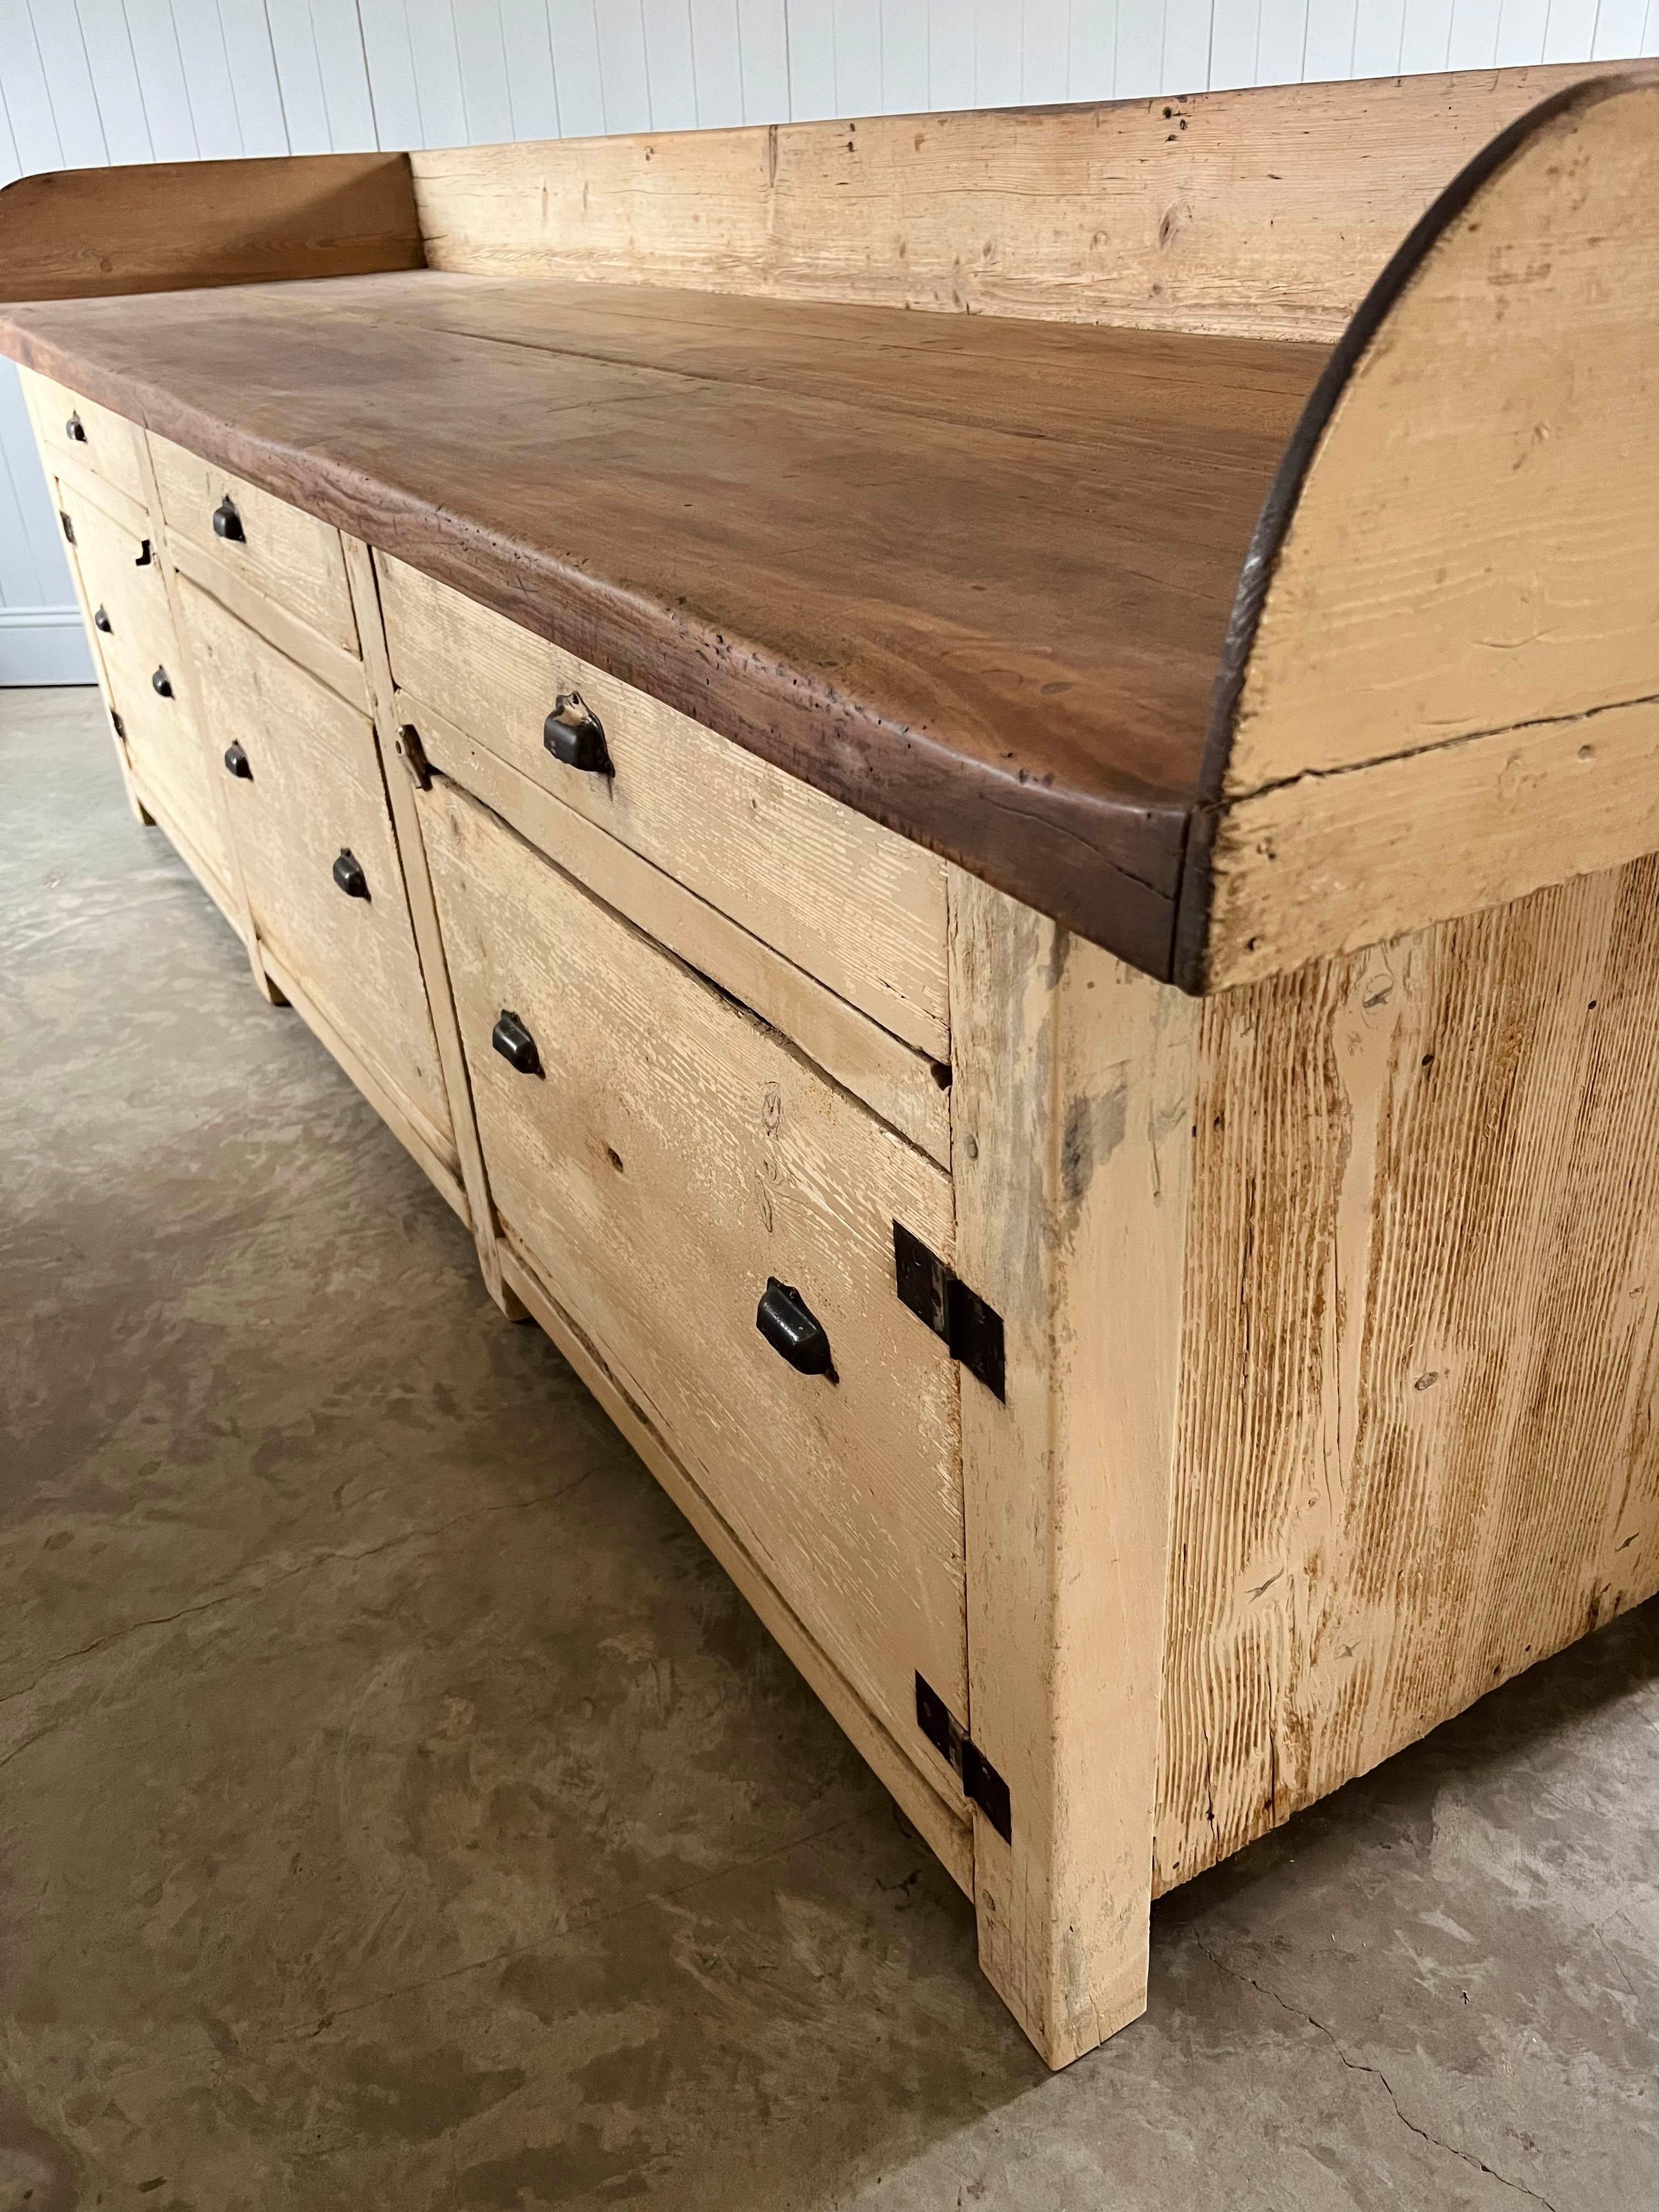 This amazing boulangerie sideboard was found in Toulon which is just East of Marseille.  The bakery building had been boarded up since 1965 and then recently sold for development. What a find !!!

Circa 1920's constructed with an oak frame, pine